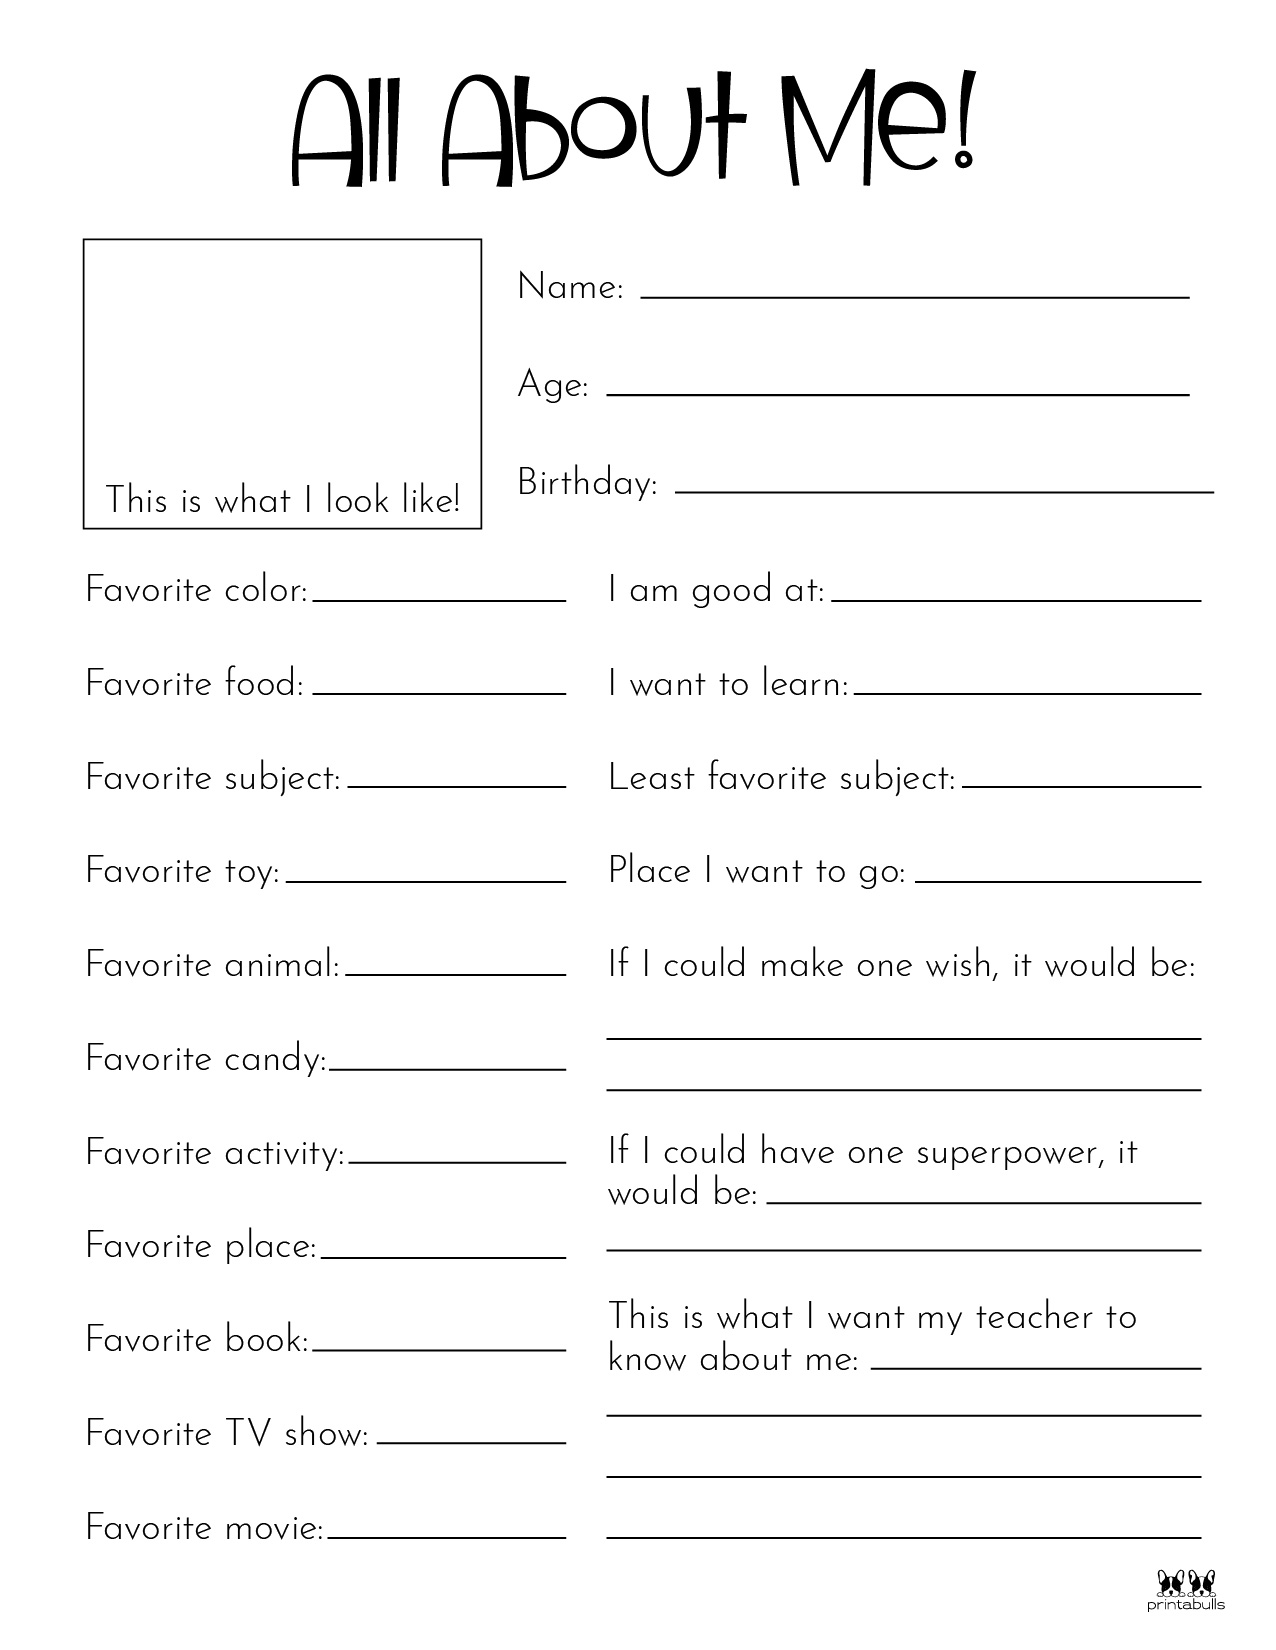 all-about-me-worksheet-free-printable